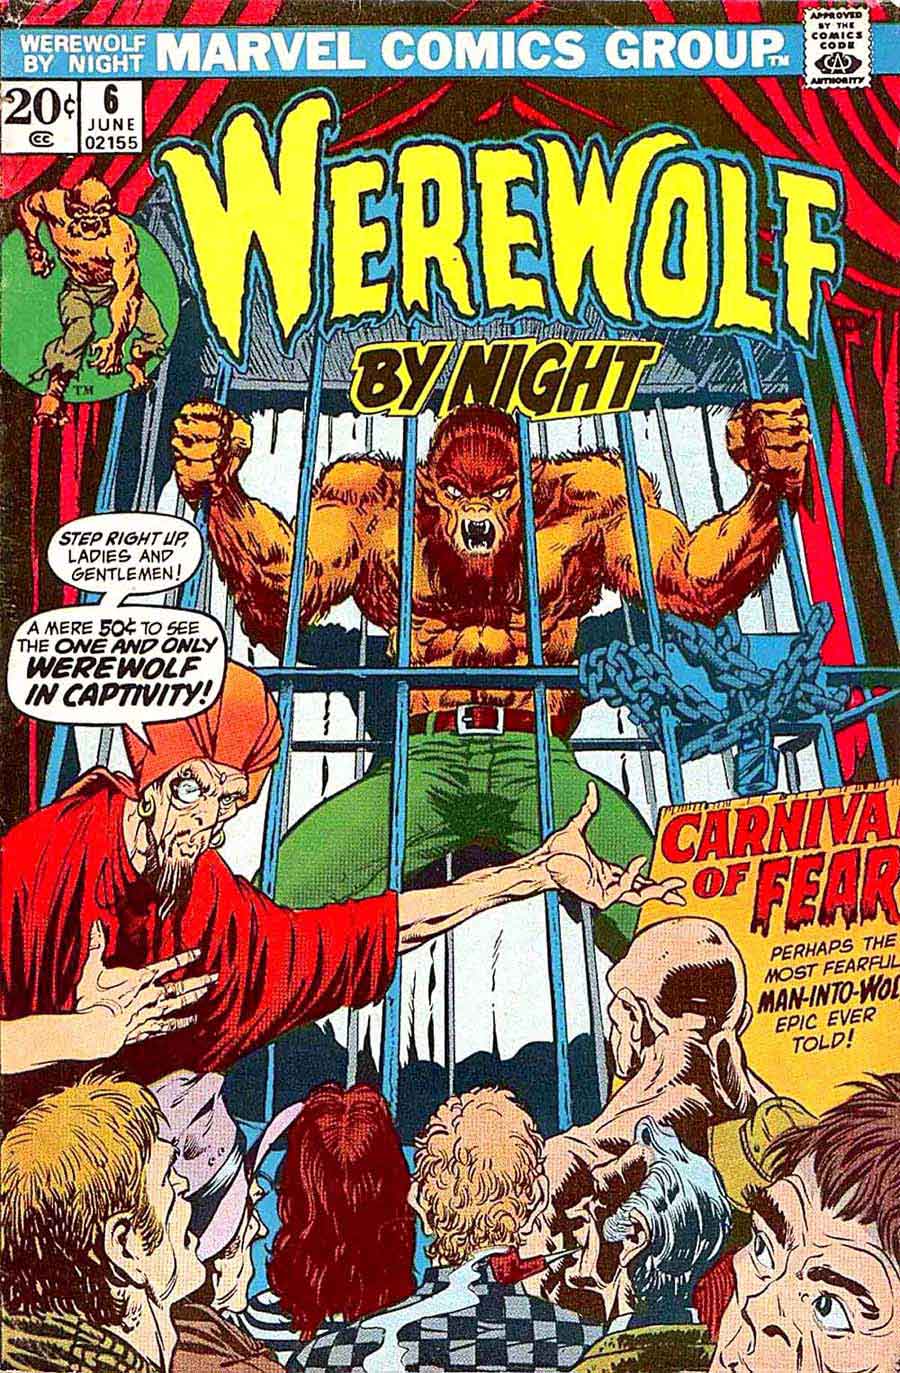 Werewolf by Night v1 #6 1970s marvel comic book cover art by Mike Ploog